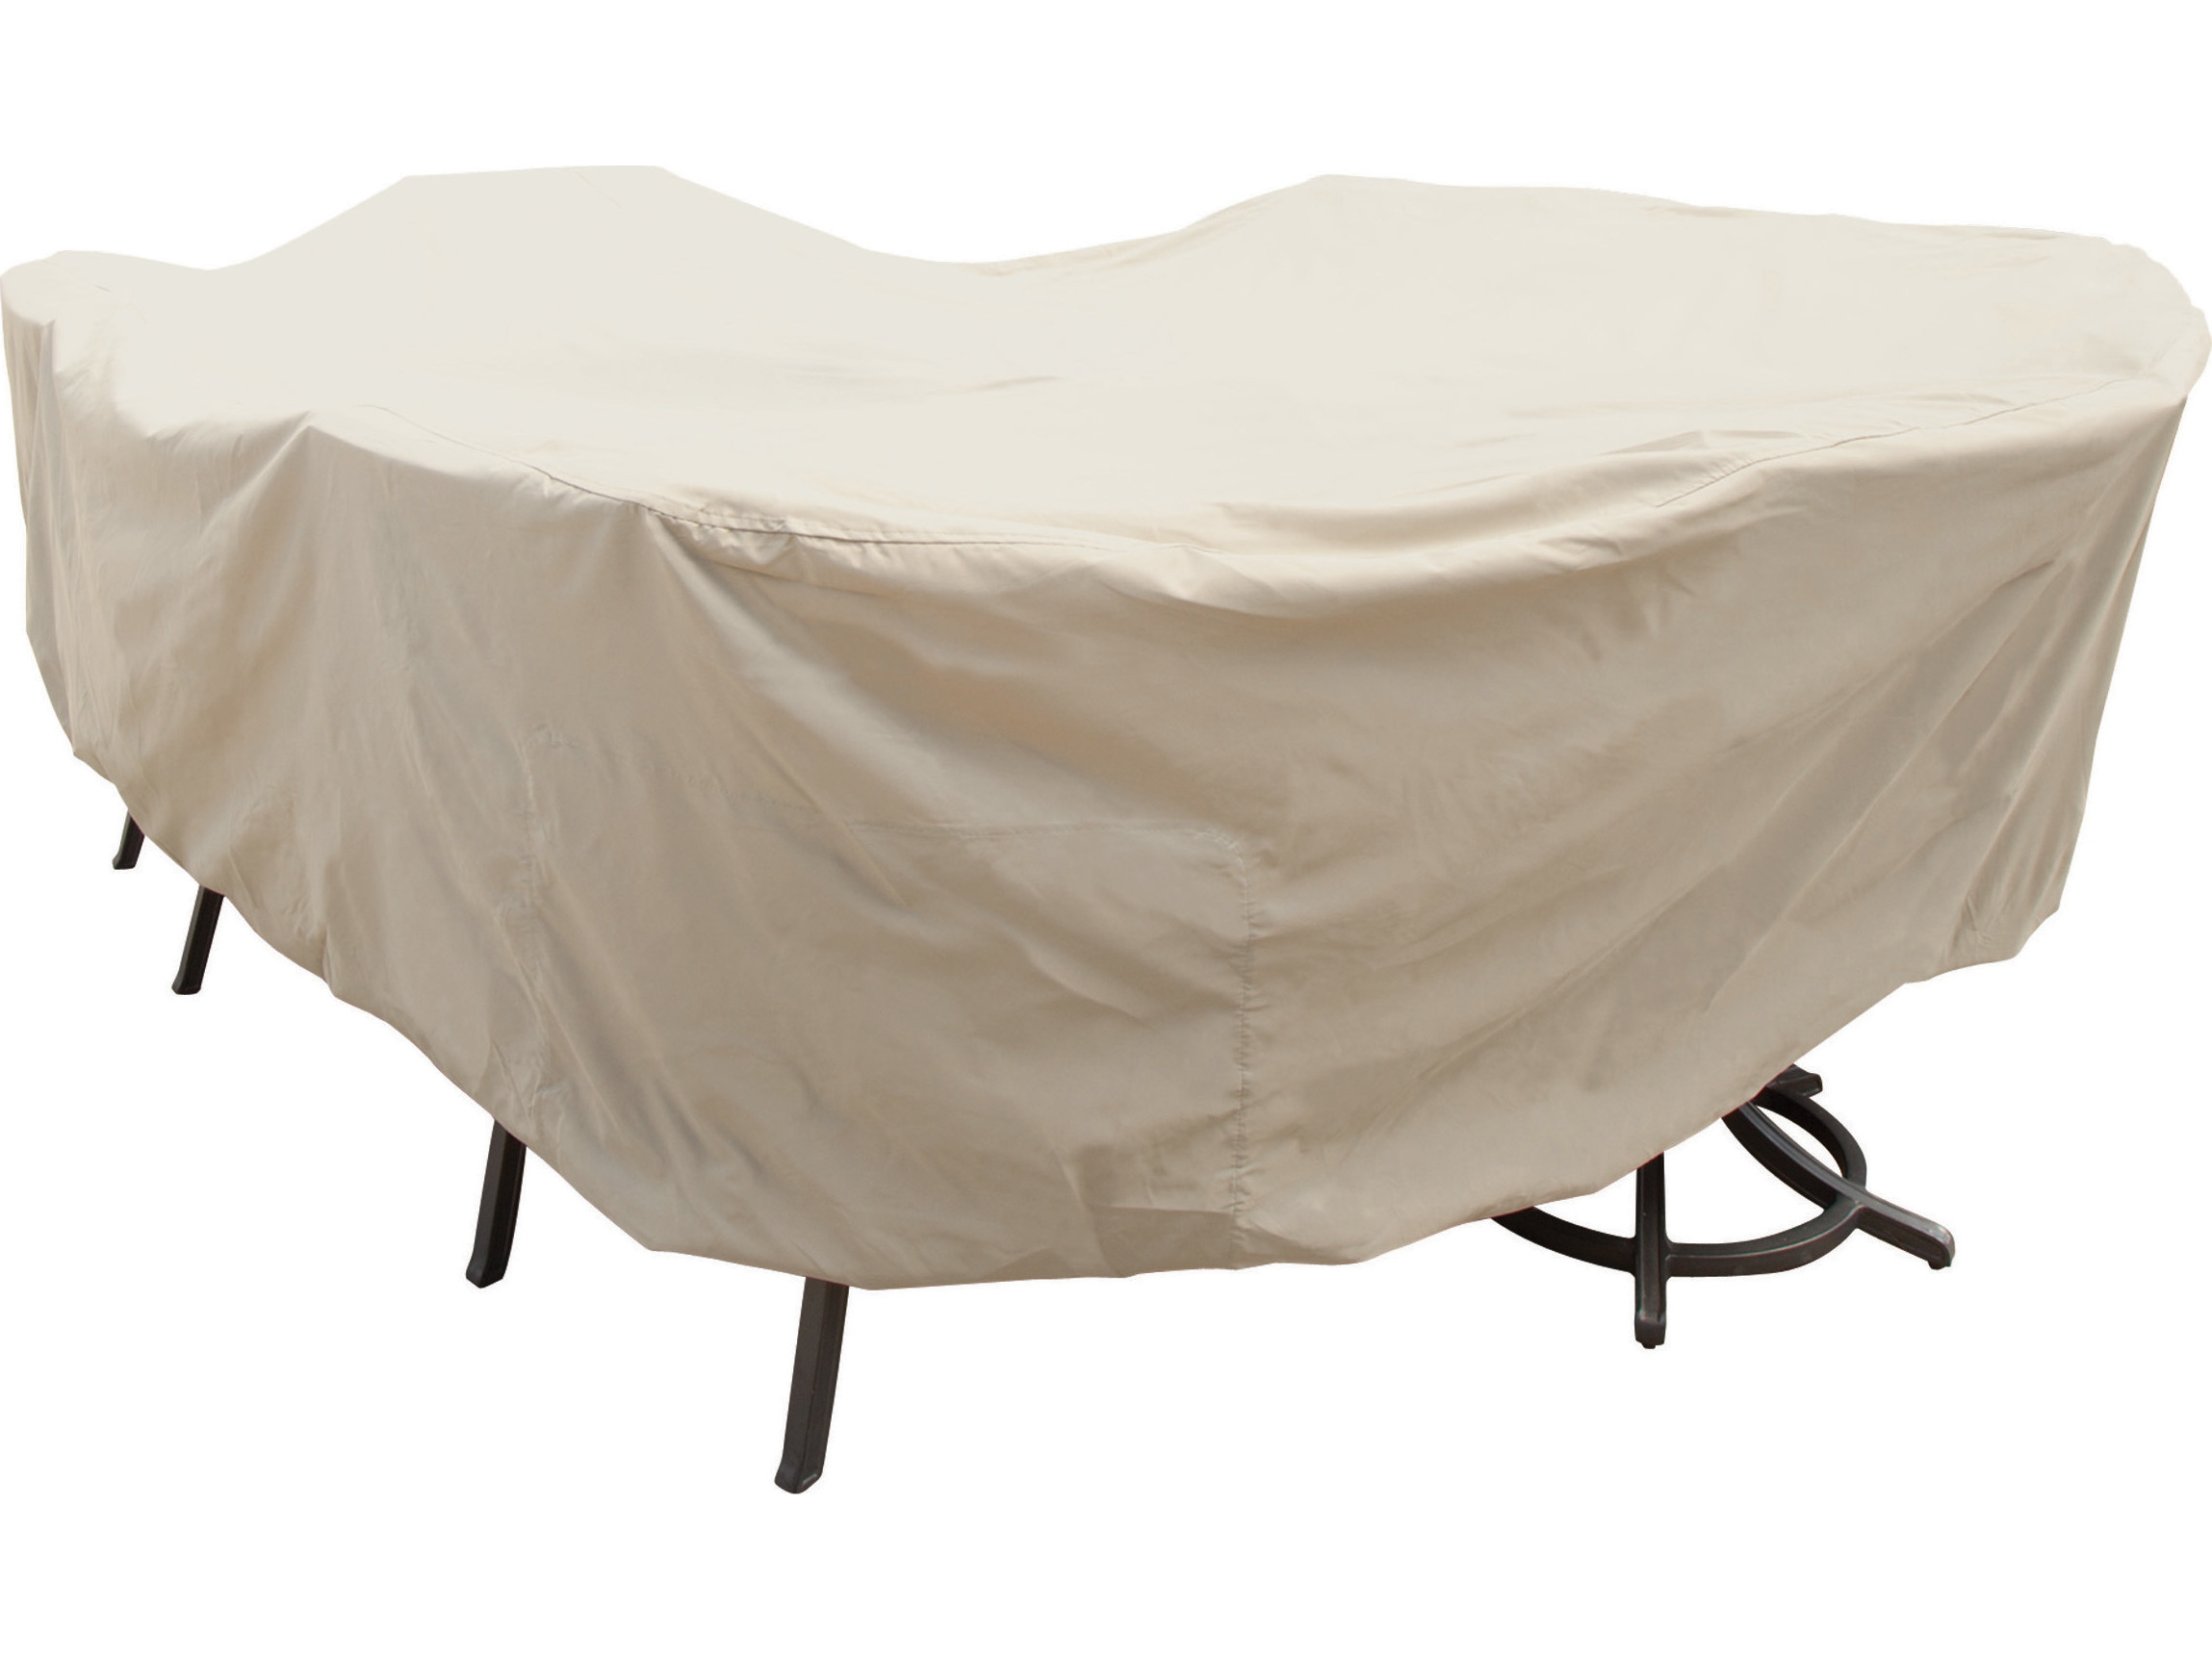 Treasure Garden Large Oval Rectangle Table Chairs Cover Excp699 - Large Oval Patio Set Covers